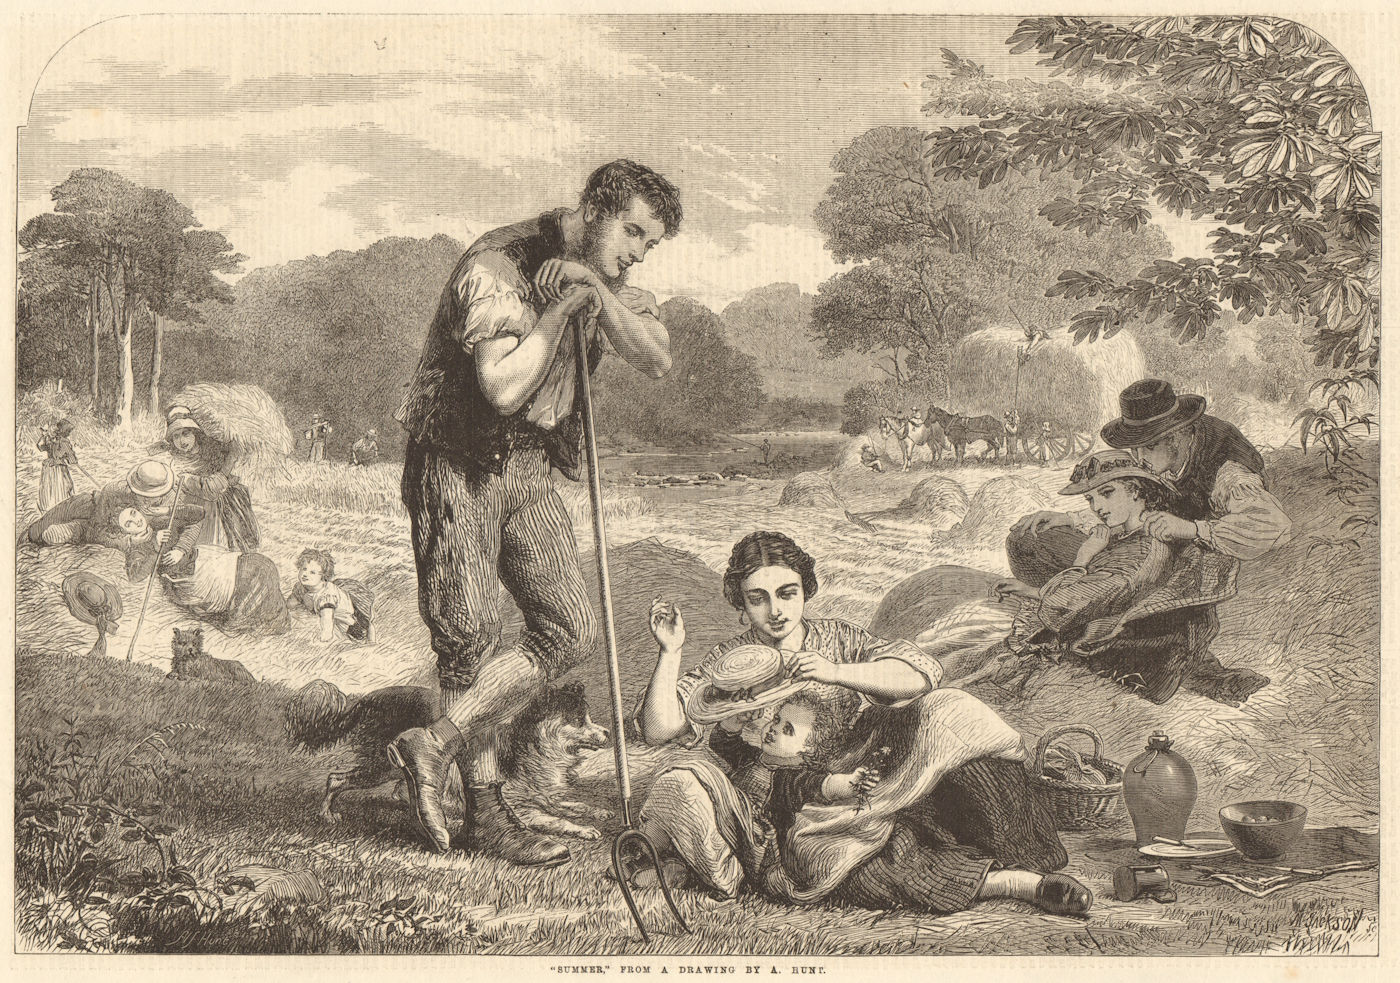 Associate Product "Summer" from a drawing by A. Hunt. Farming 1863 antique ILN full page print